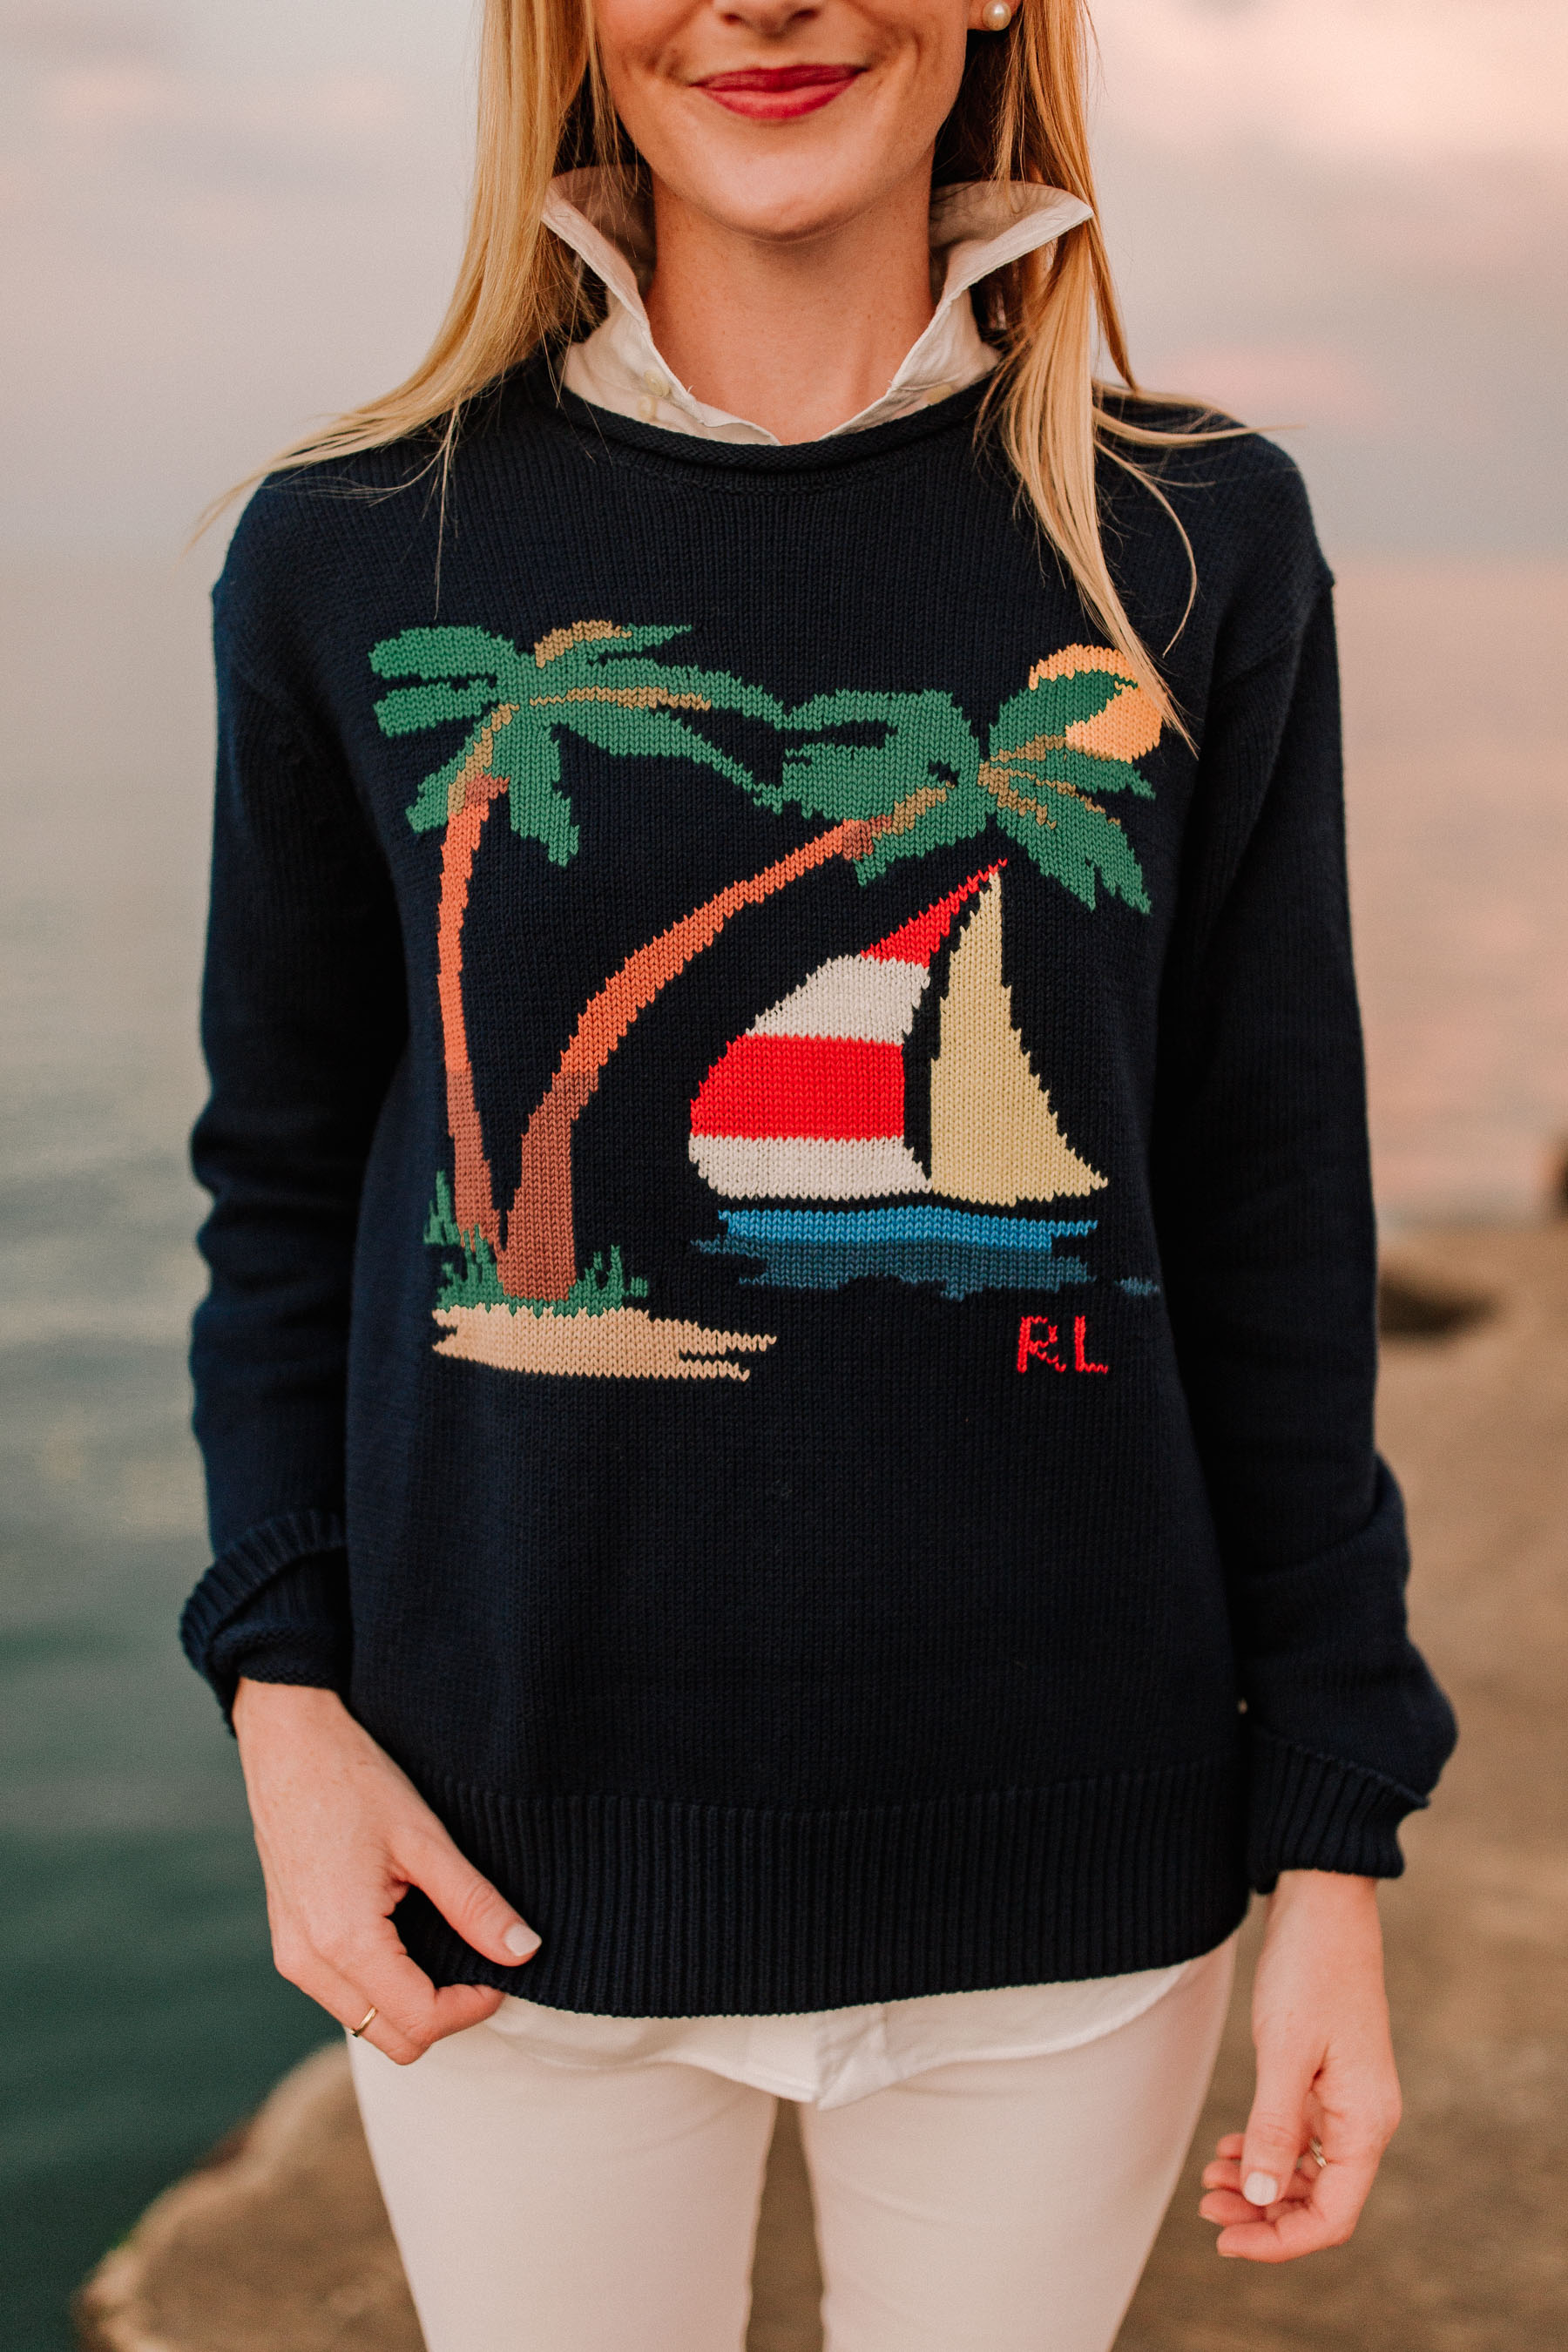 Boat Cotton Rollneck Sweatert - Kelly in the city